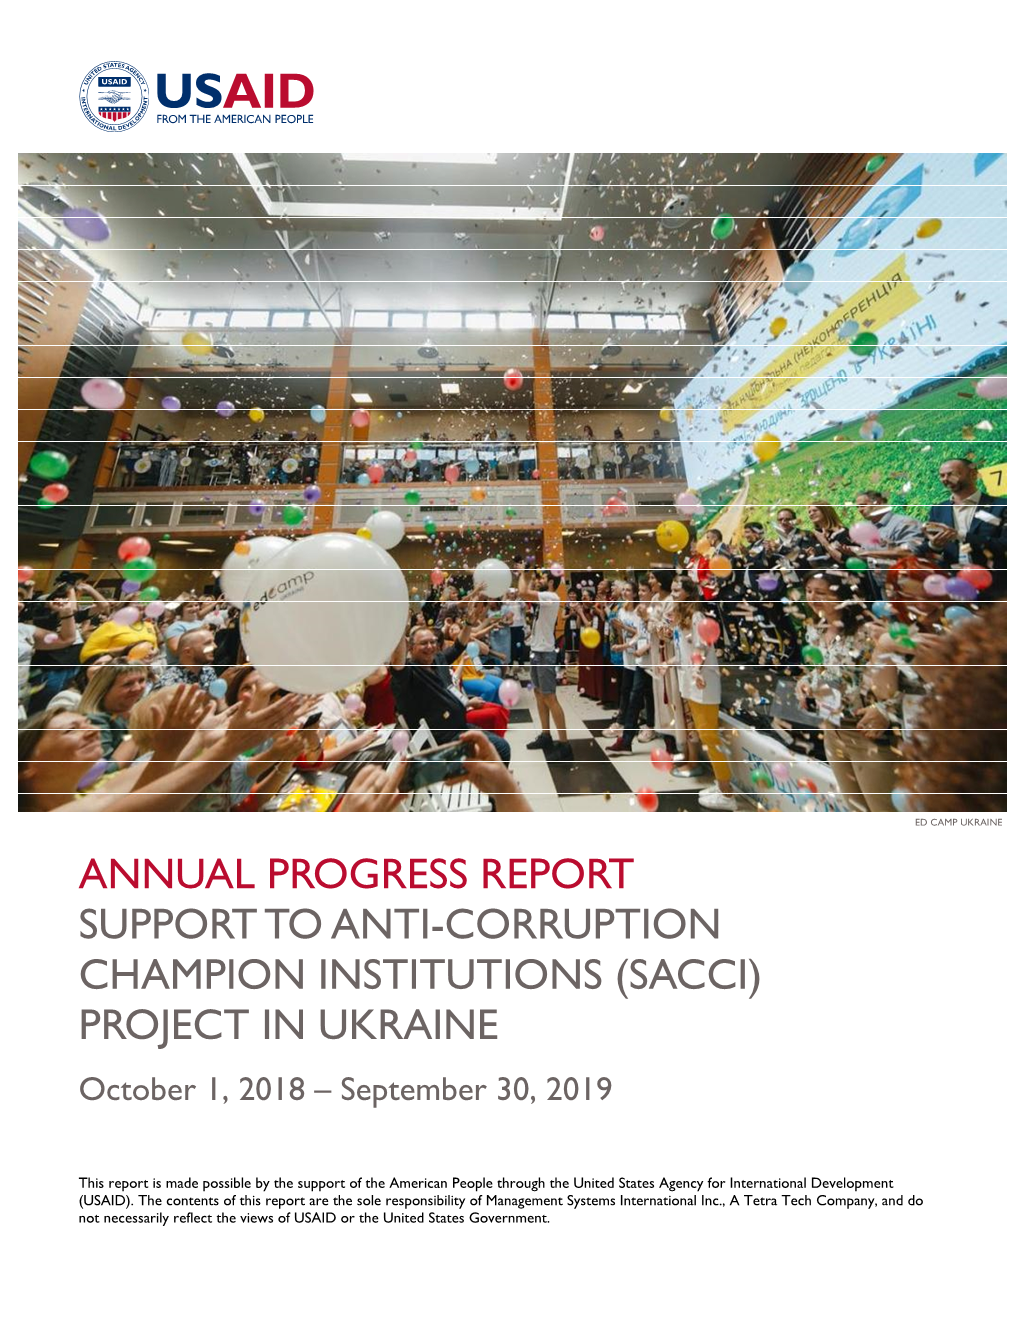 SUPPORT to ANTI-CORRUPTION CHAMPION INSTITUTIONS (SACCI) PROJECT in UKRAINE October 1, 2018 – September 30, 2019